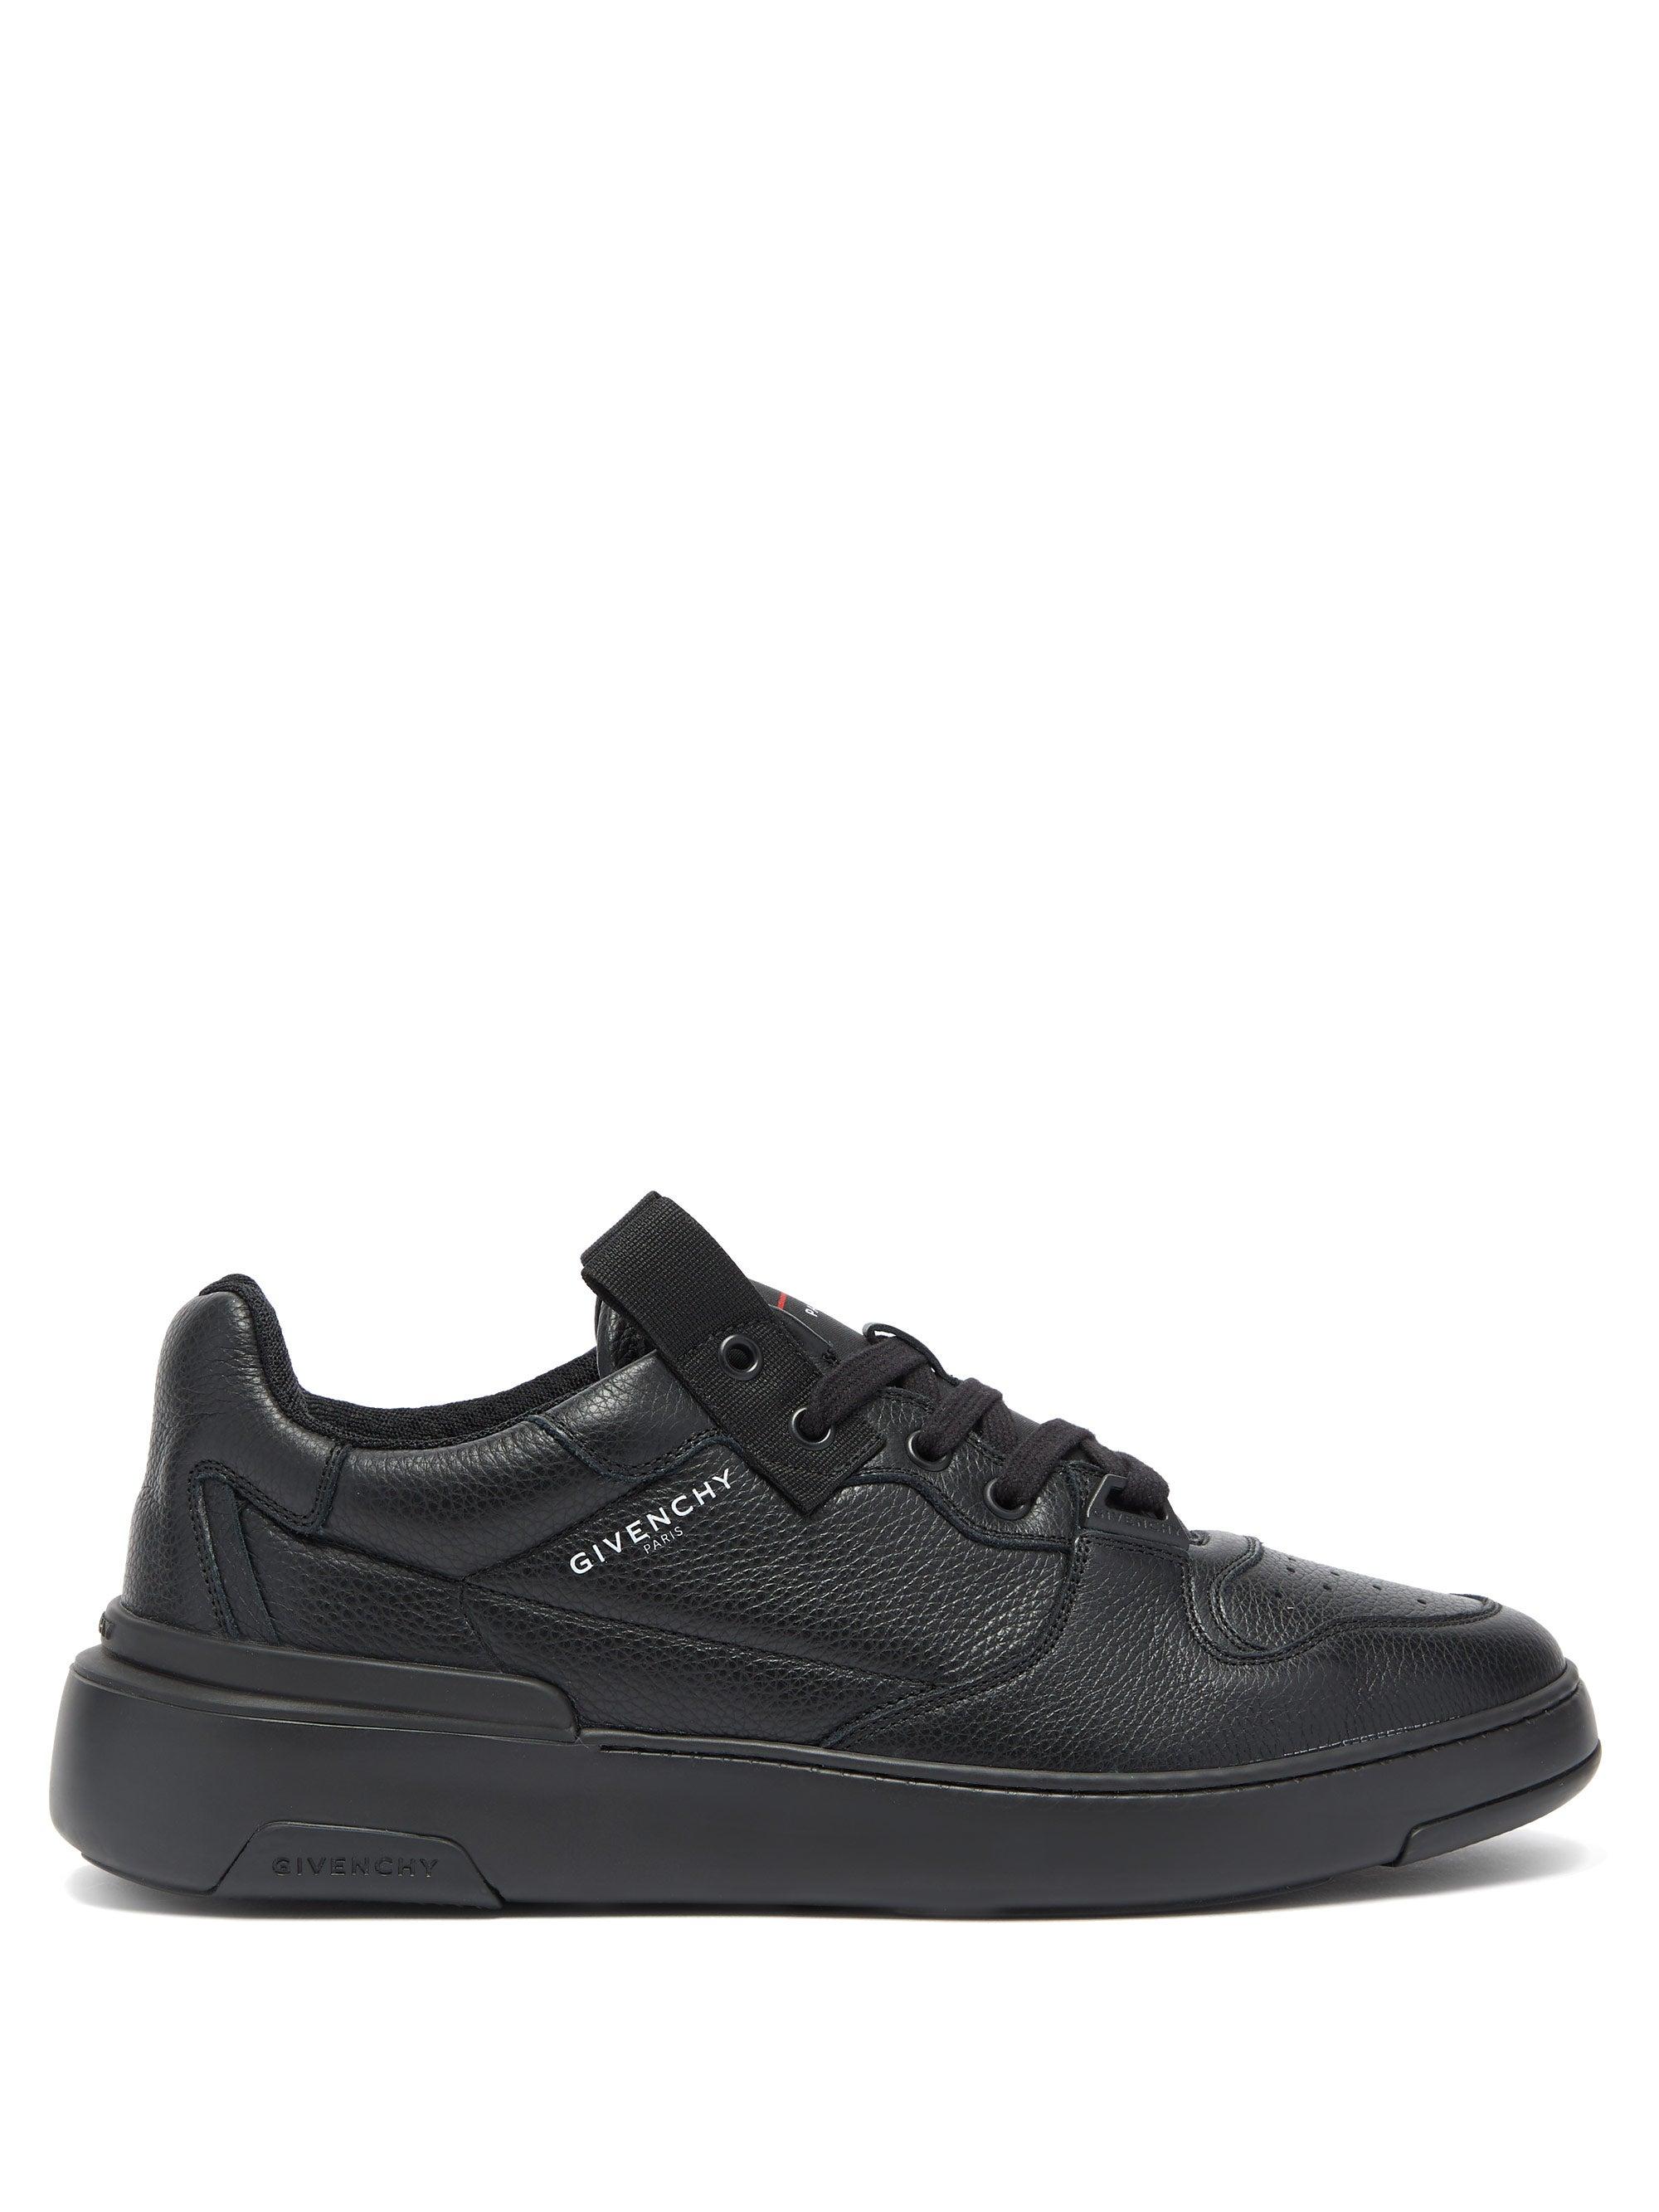 Givenchy Wing Grained-leather Low-top Trainers in Black for Men - Lyst